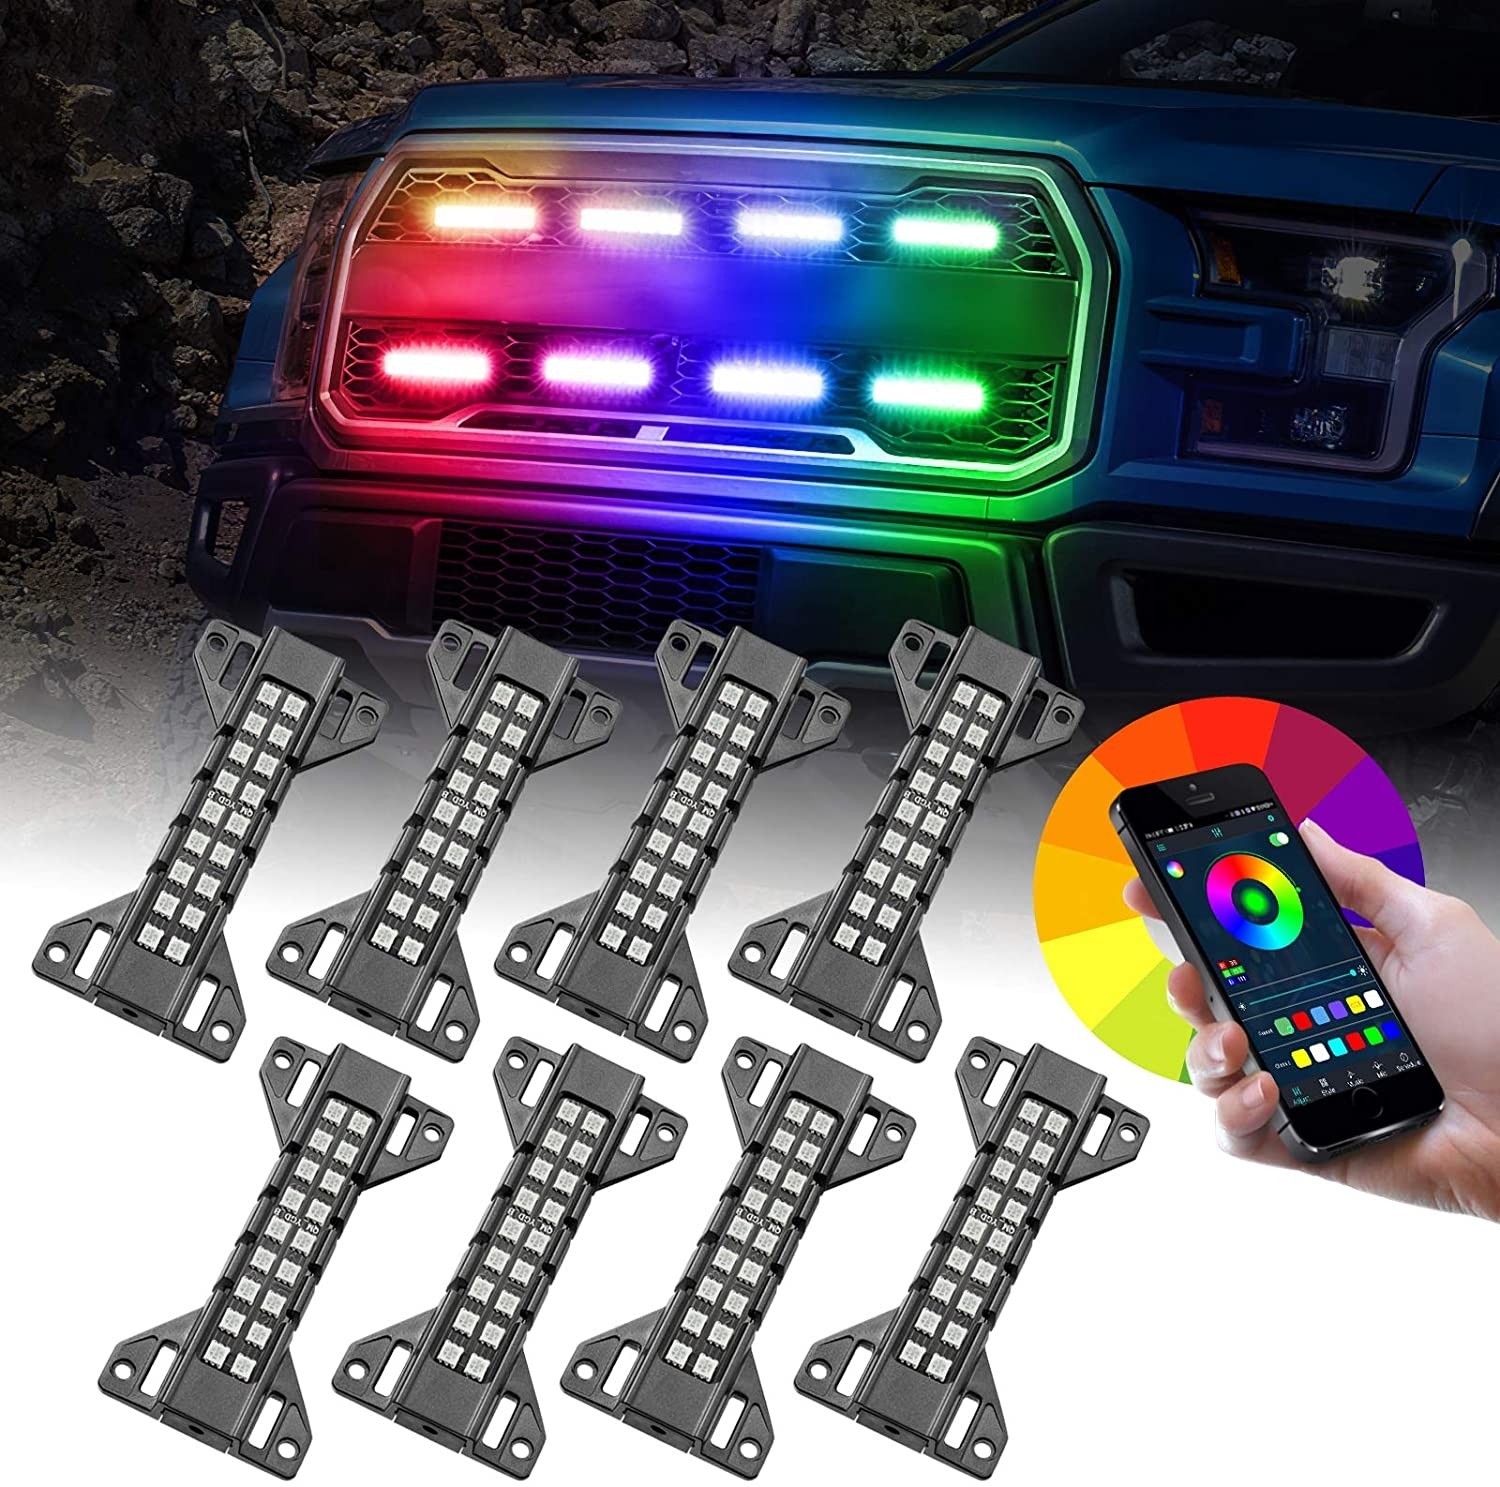  OFFROADTOWN LED Grille Lights, 8 Pack RGB Lighting Kit for Grille Raptor Lights Front Grille Lights Strobe Lights Neon Lights APP Control for Truck Ford Tacoma Chevy UTV Car Raptor Grille Accessories 